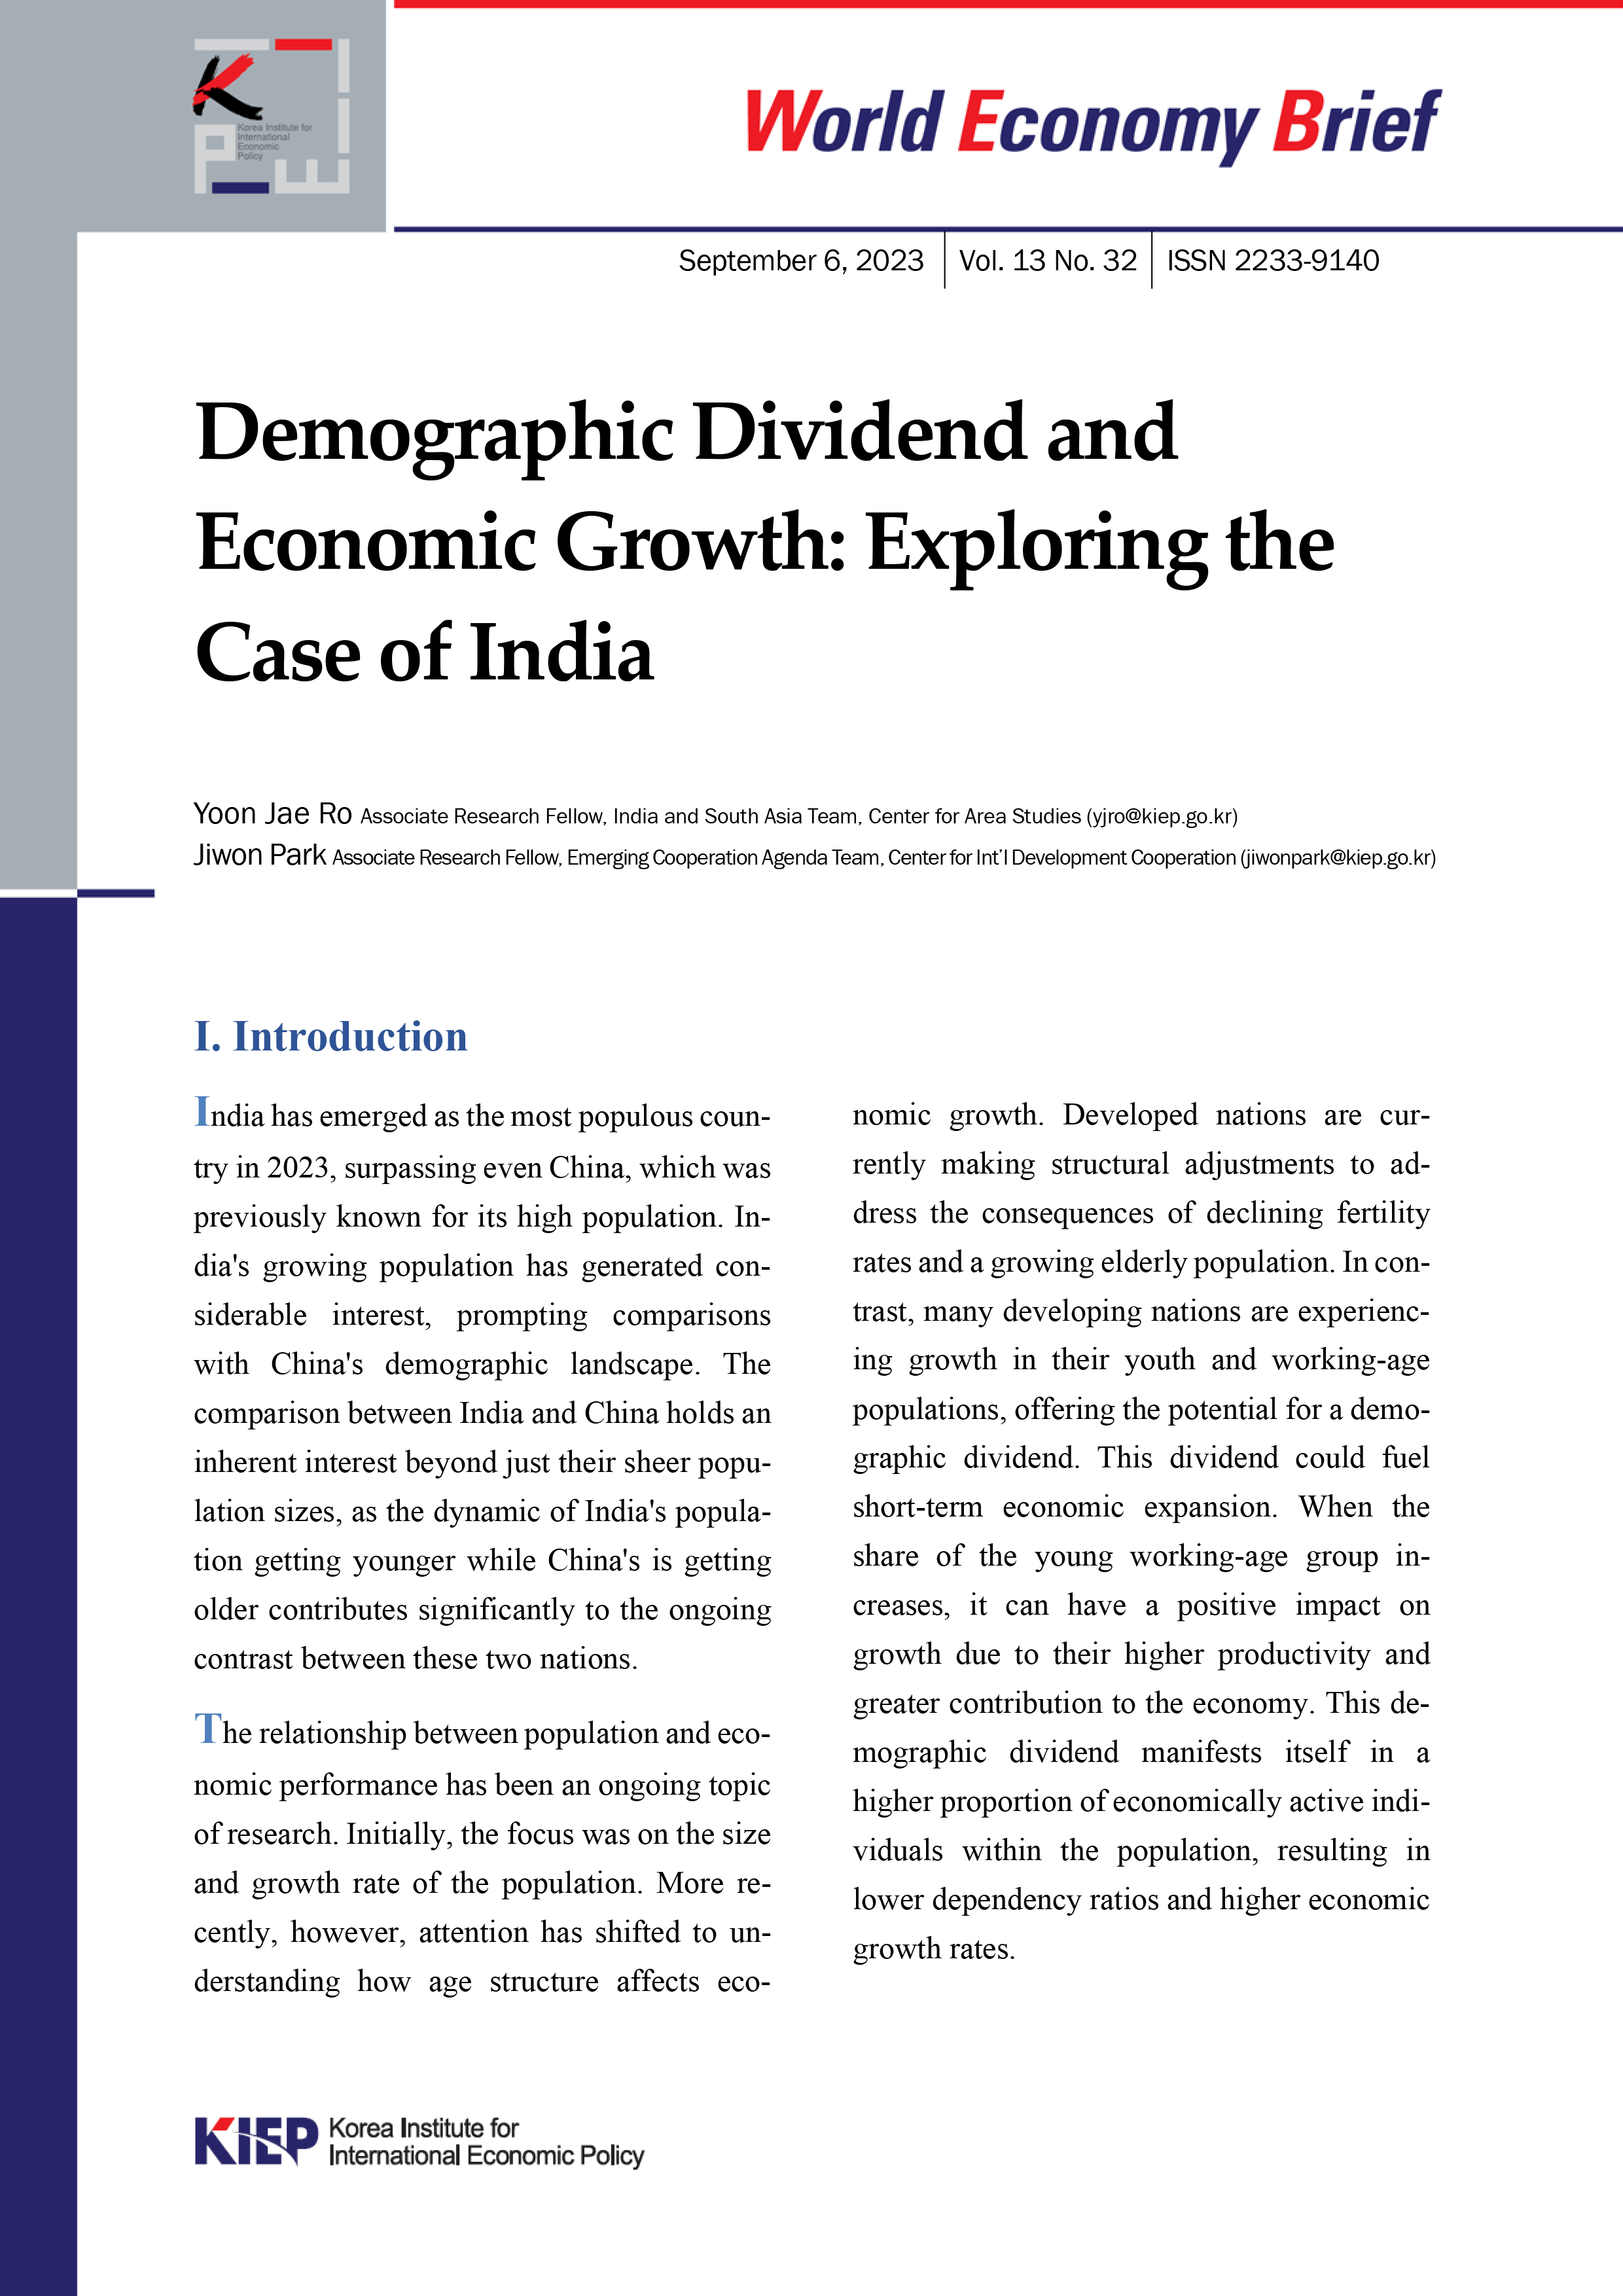 Demographic Dividend and Economic Growth: Exploring the Case of India